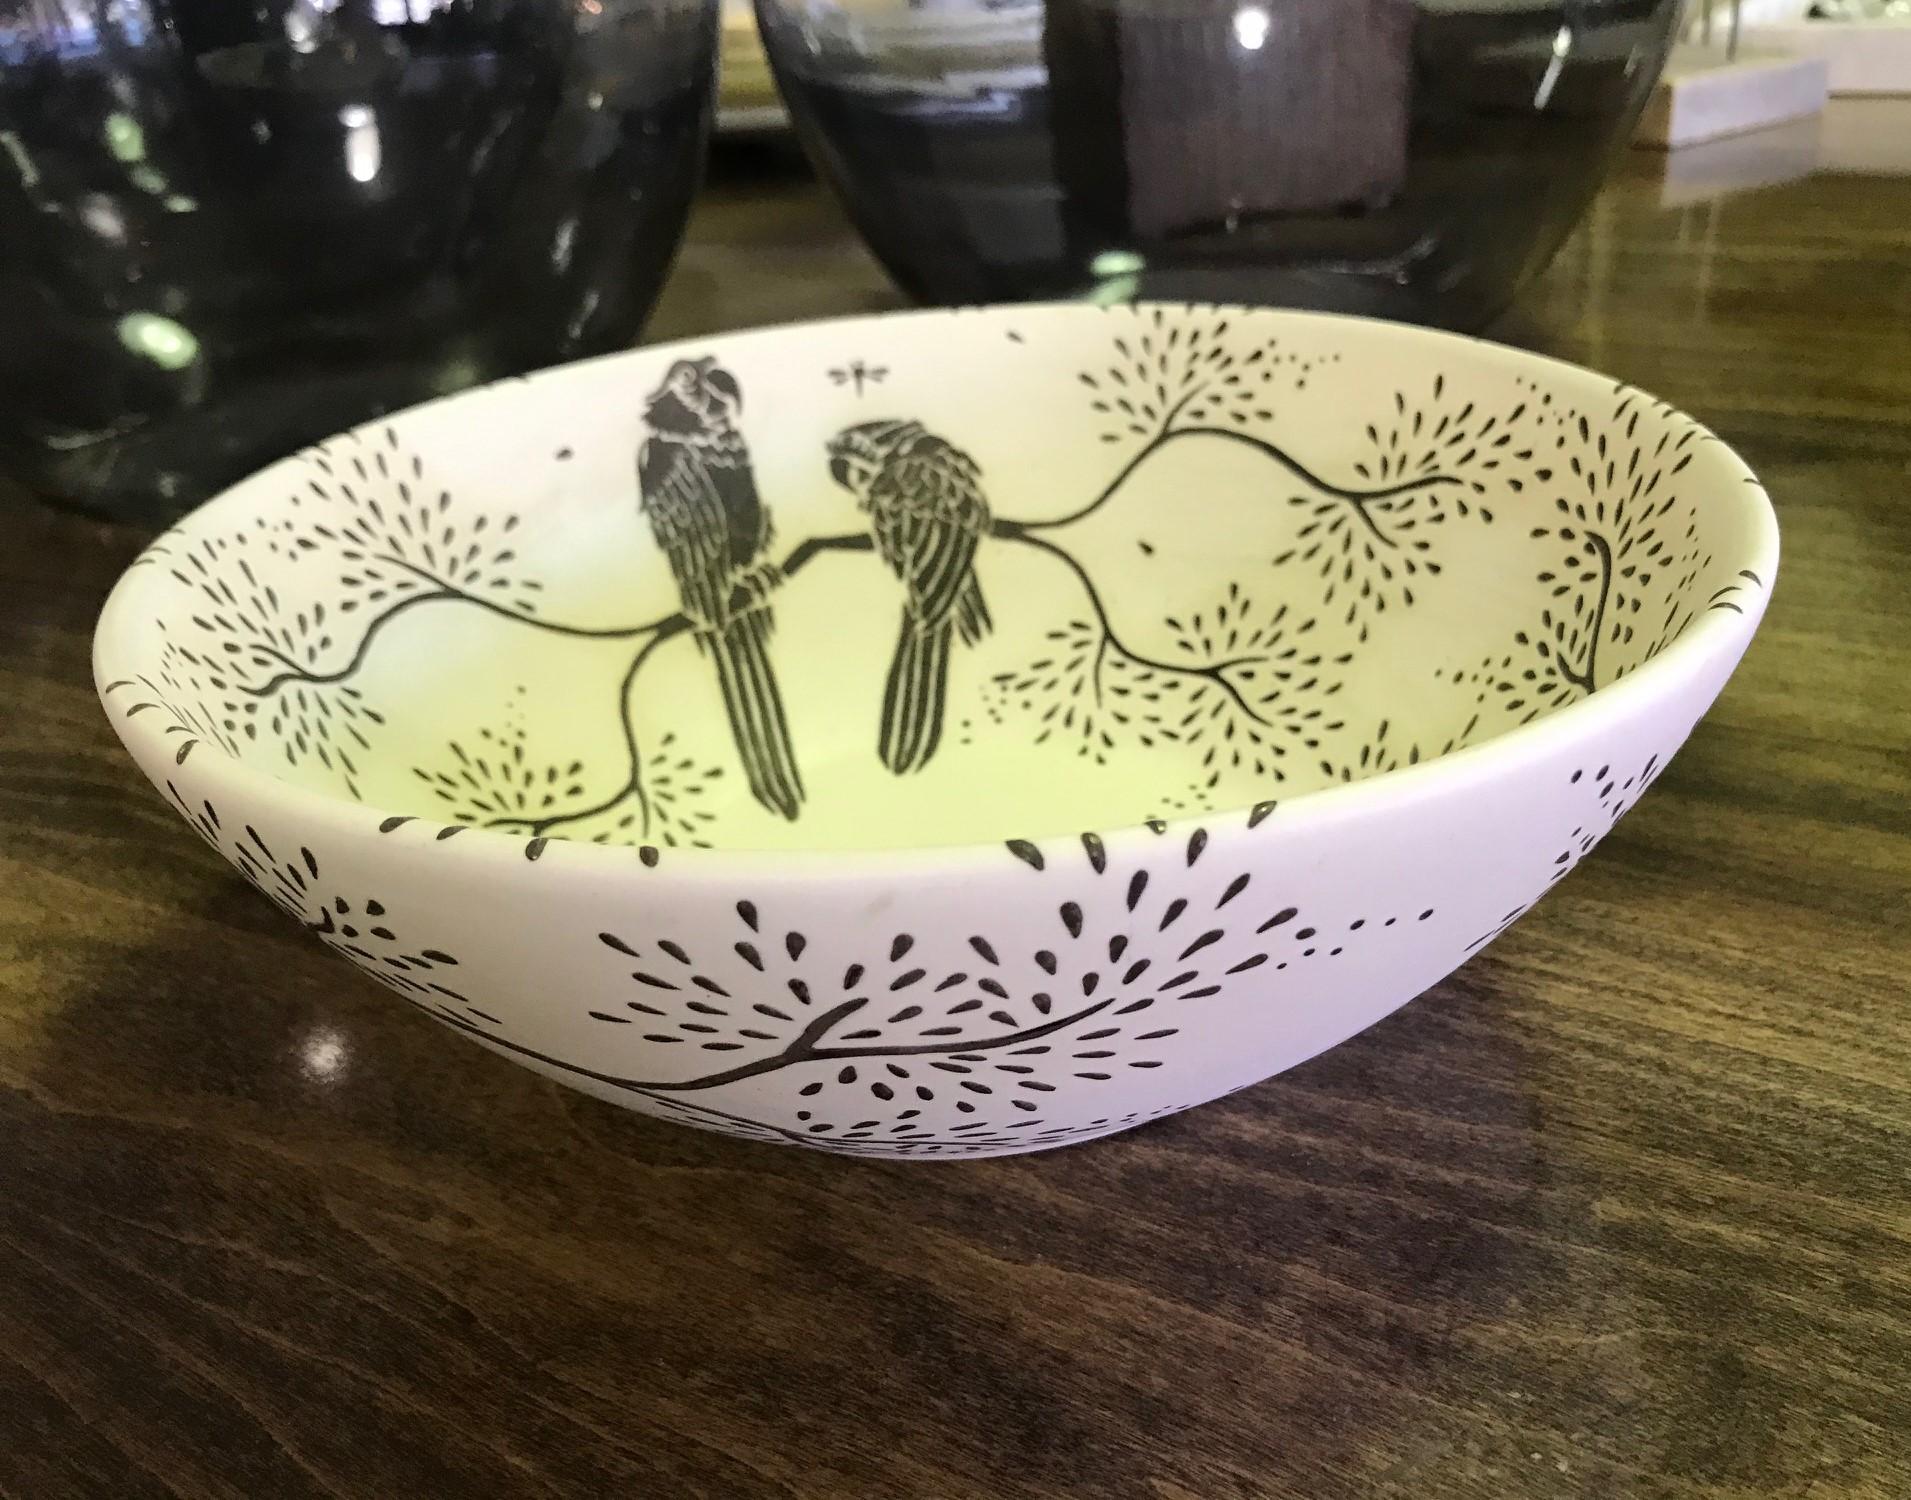 A beautifully designed, one of a kind bowl by famed Taxco, Mexican silver and ceramic artist Emelia Castillo.

The ceramic bowl is cream colored and decorated with sterling silver overlay of parrots and dragonflies on branches with beautiful